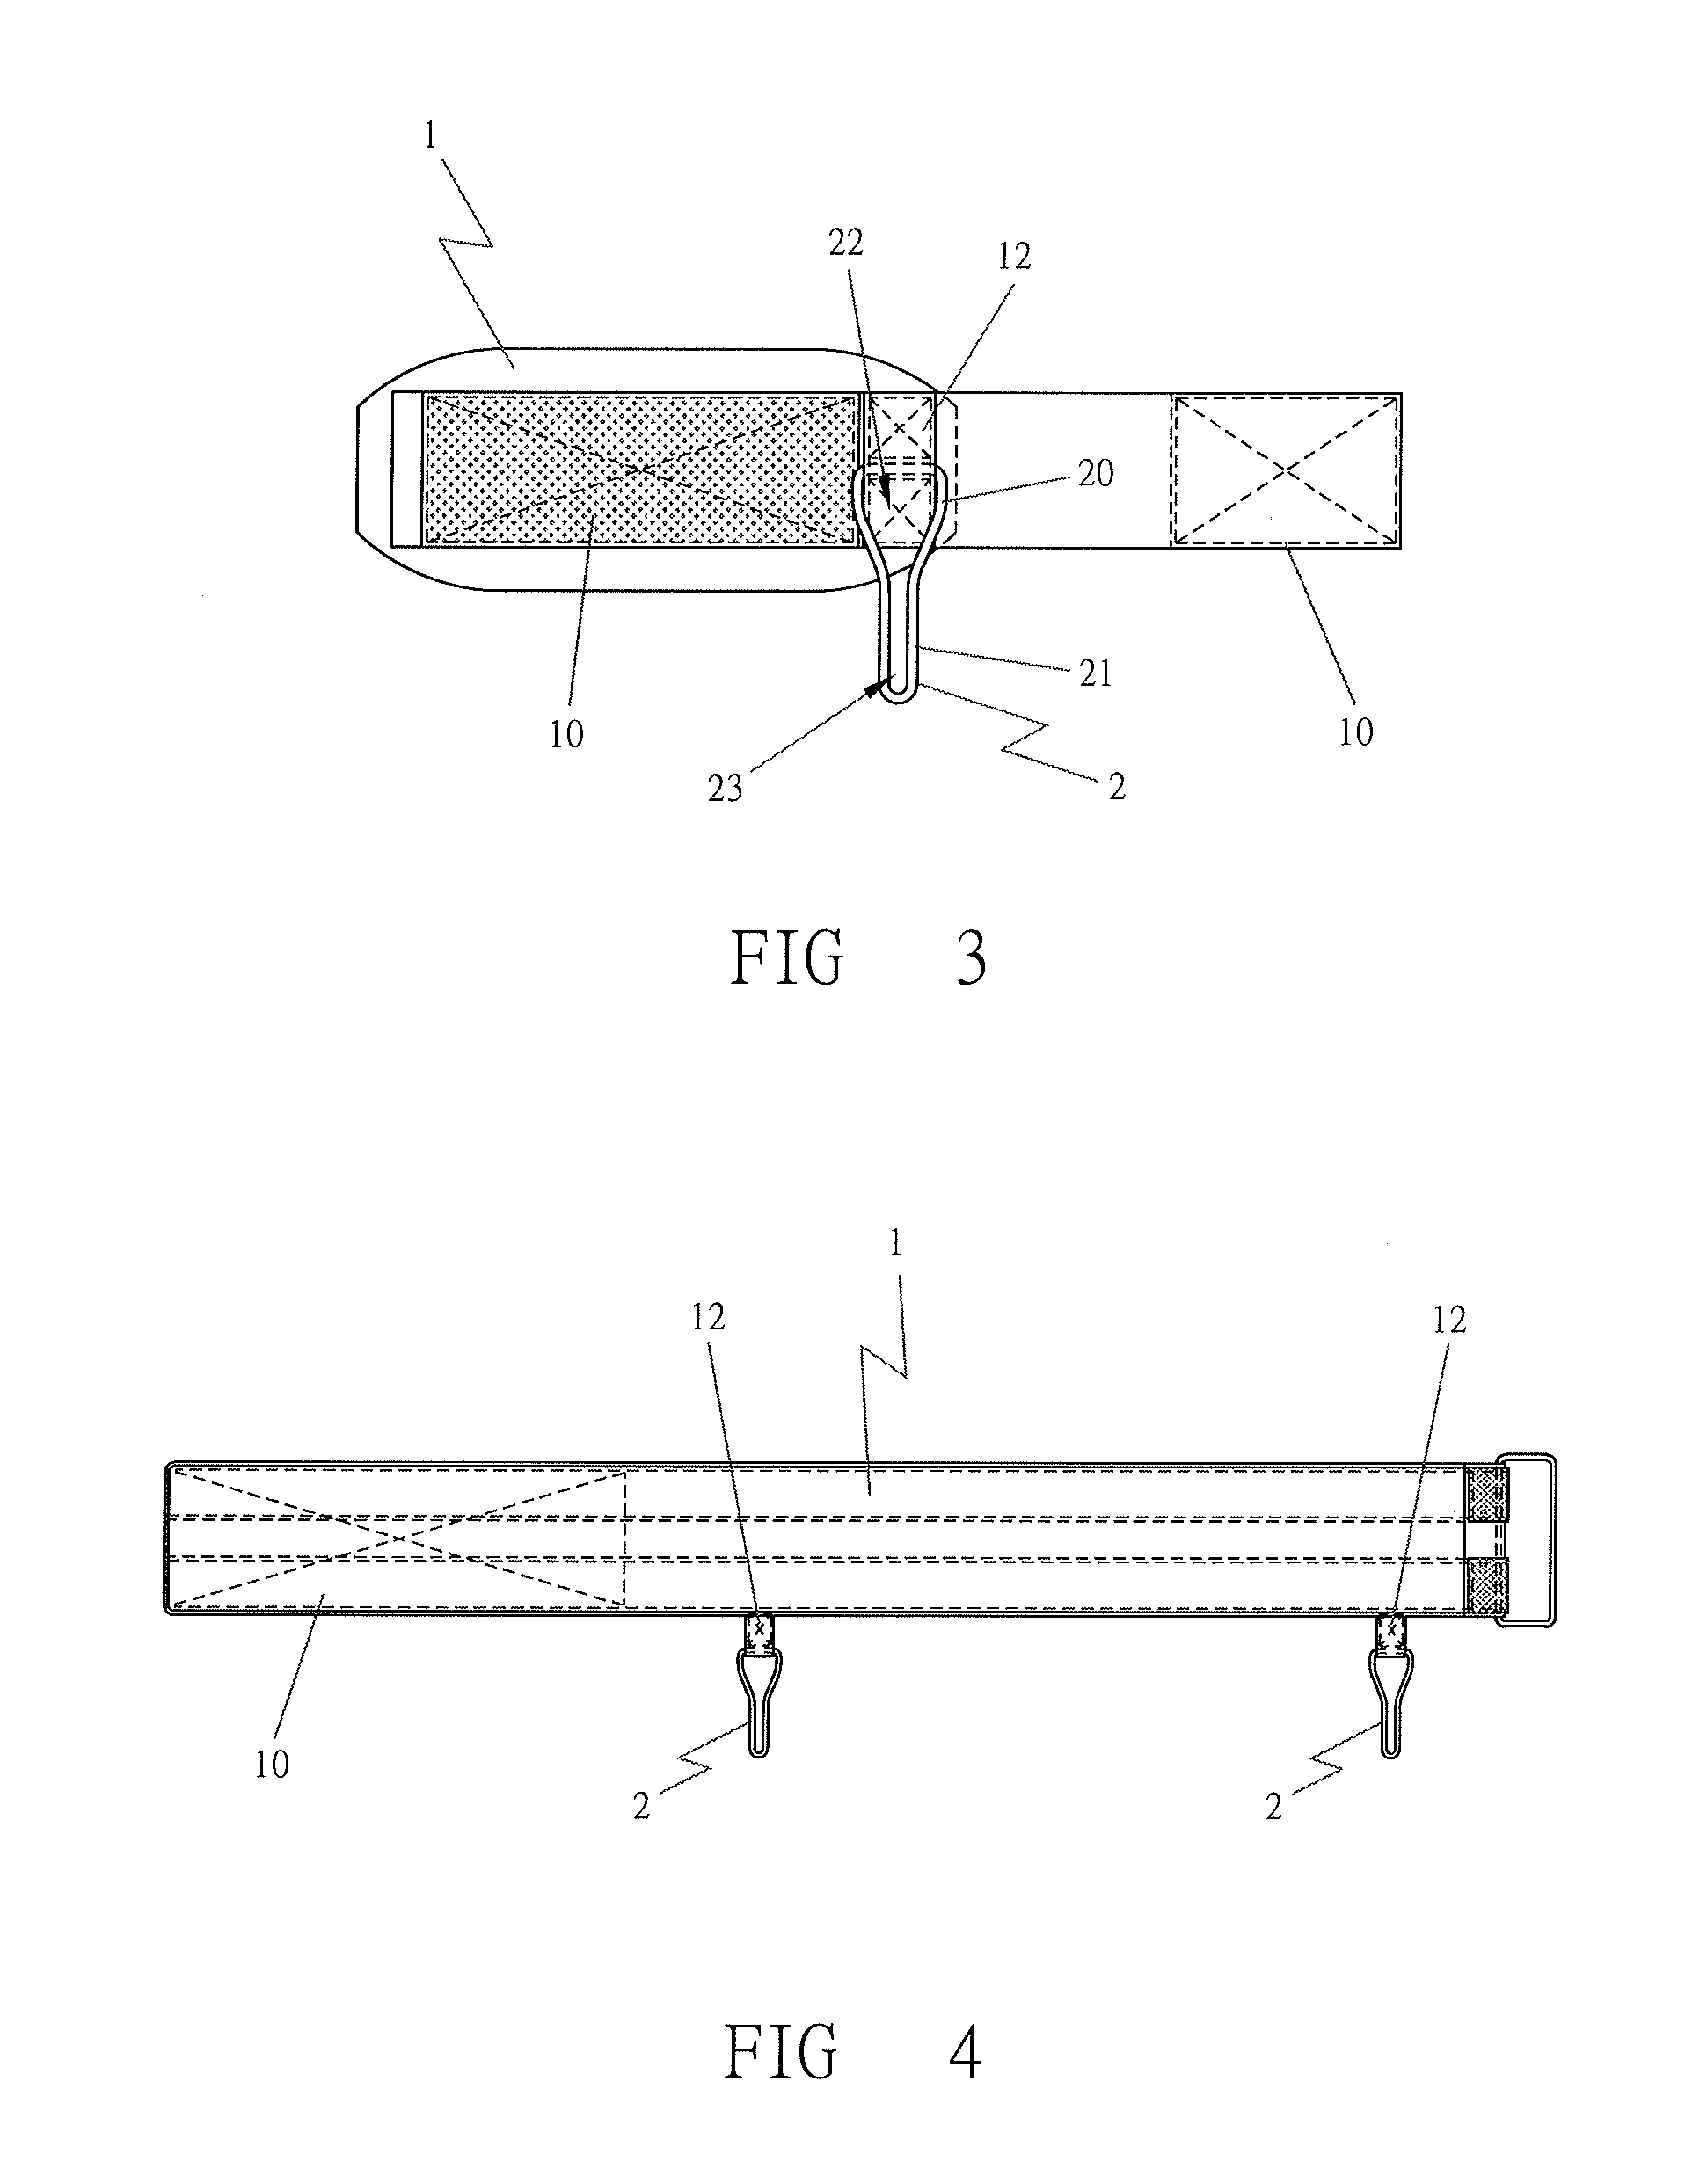 Apparatus for exercise, body building and rehabiliation